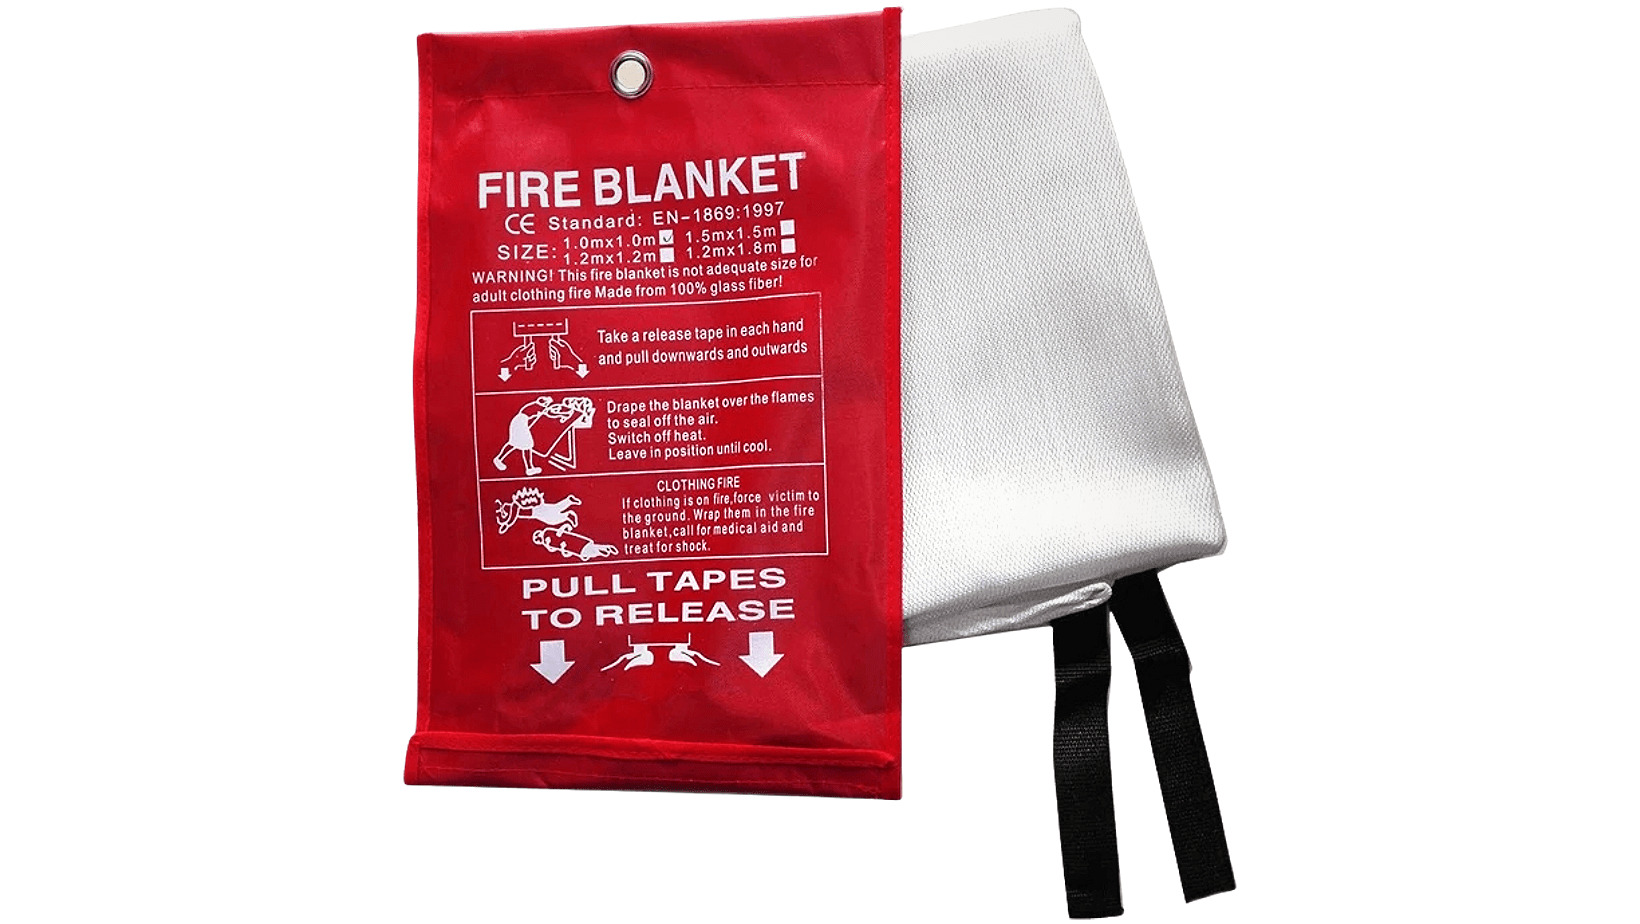 How Does A Fire Blanket Work?